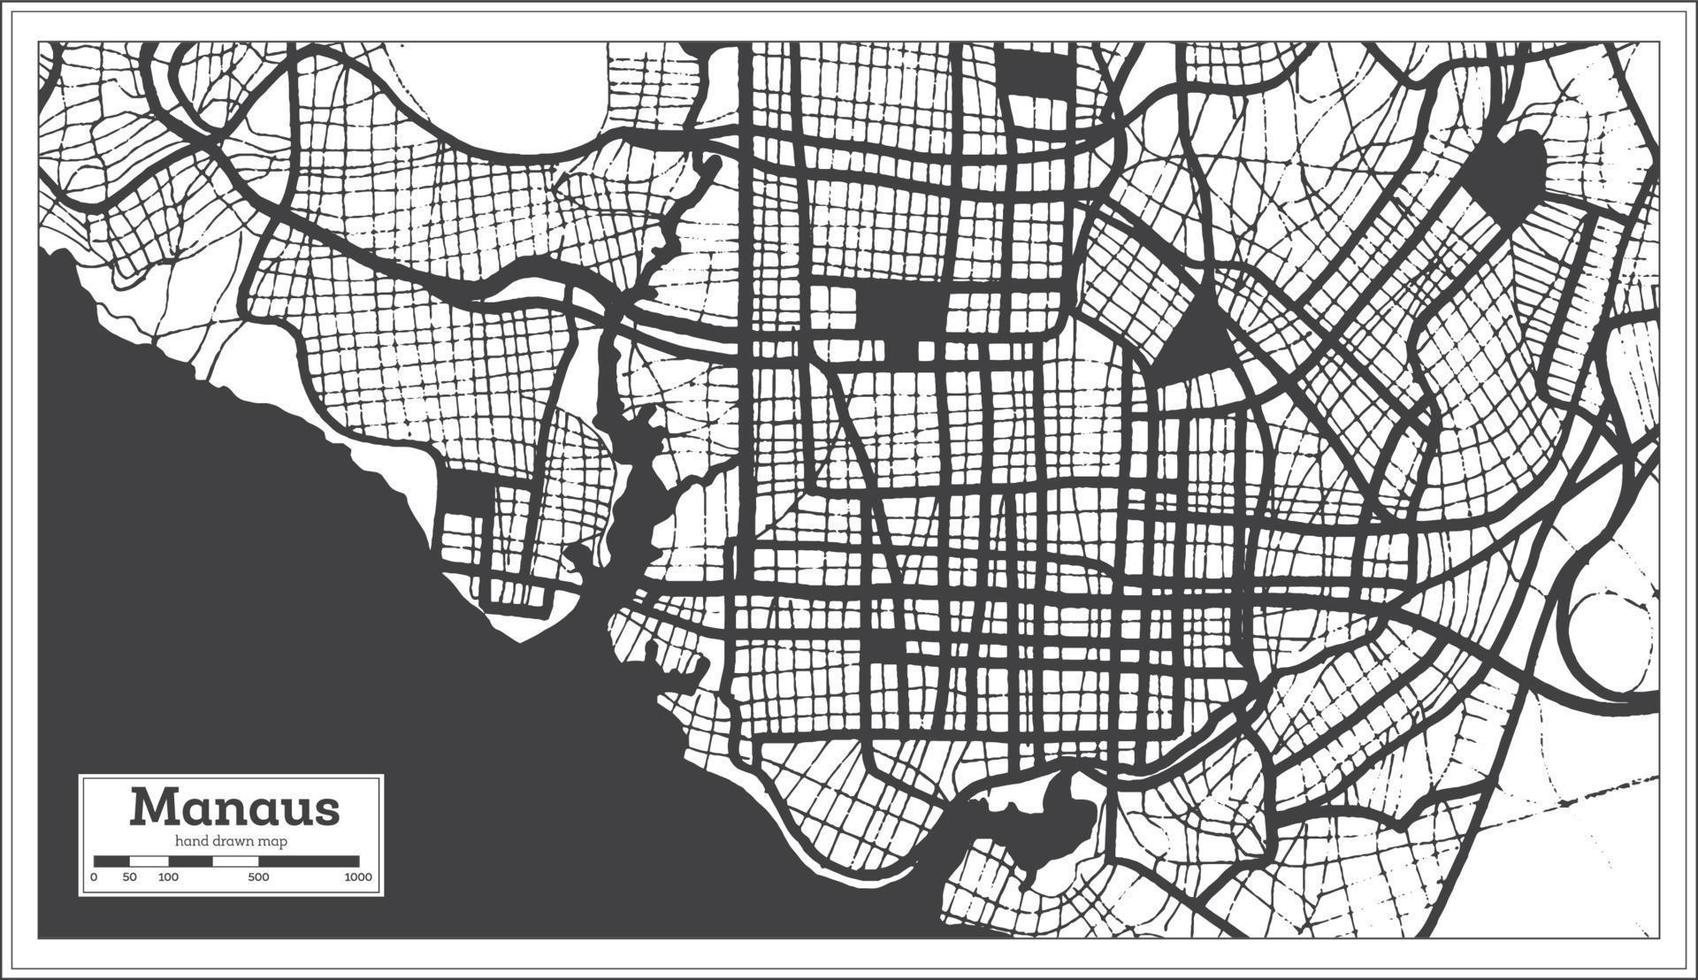 Manaus Brazil City Map in Black and White Color in Retro Style. Outline Map. vector